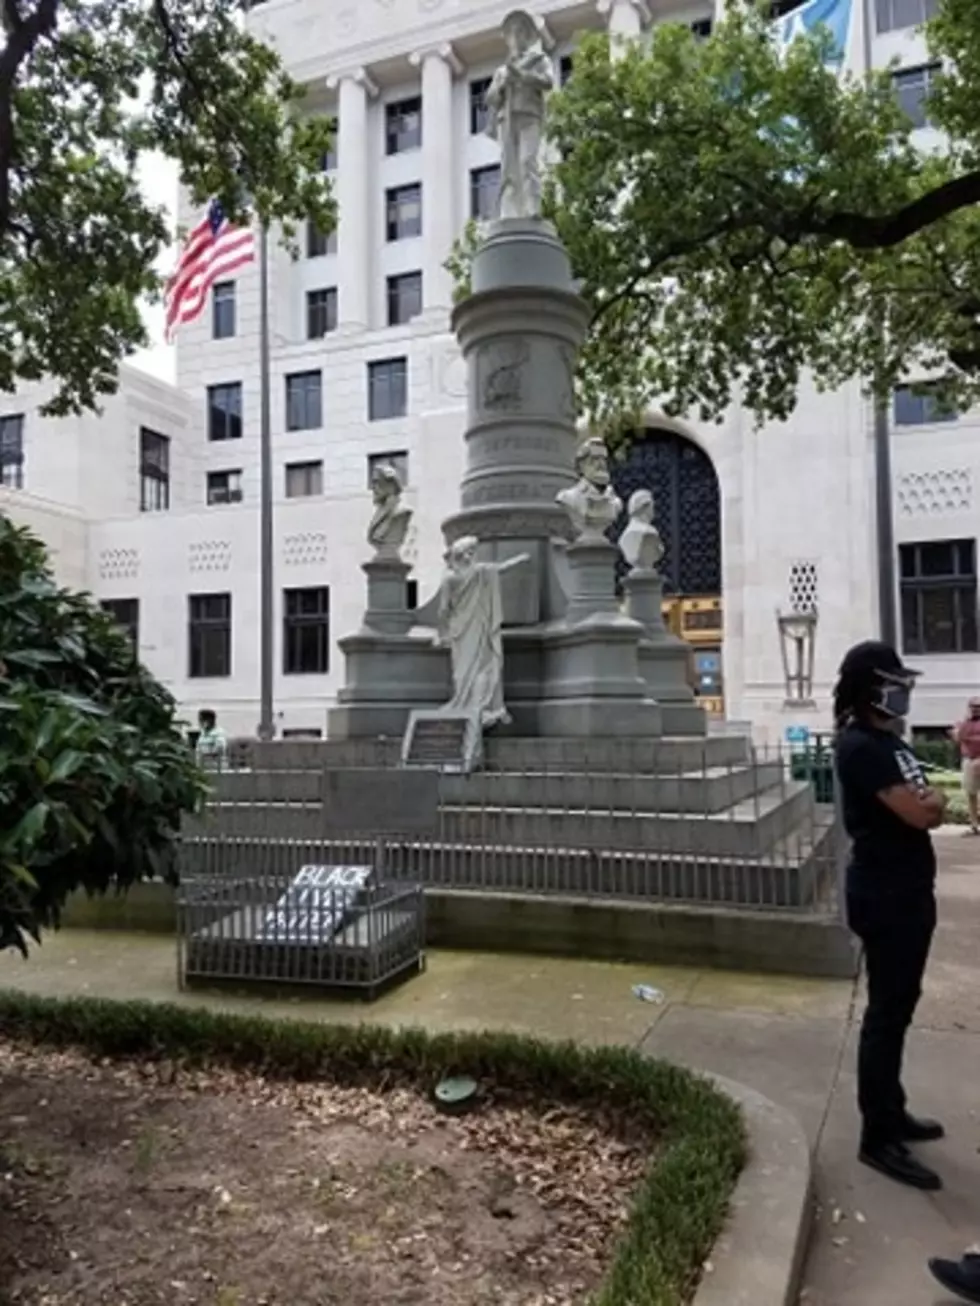 Caddo Courthouse Protest Draws Some Heat